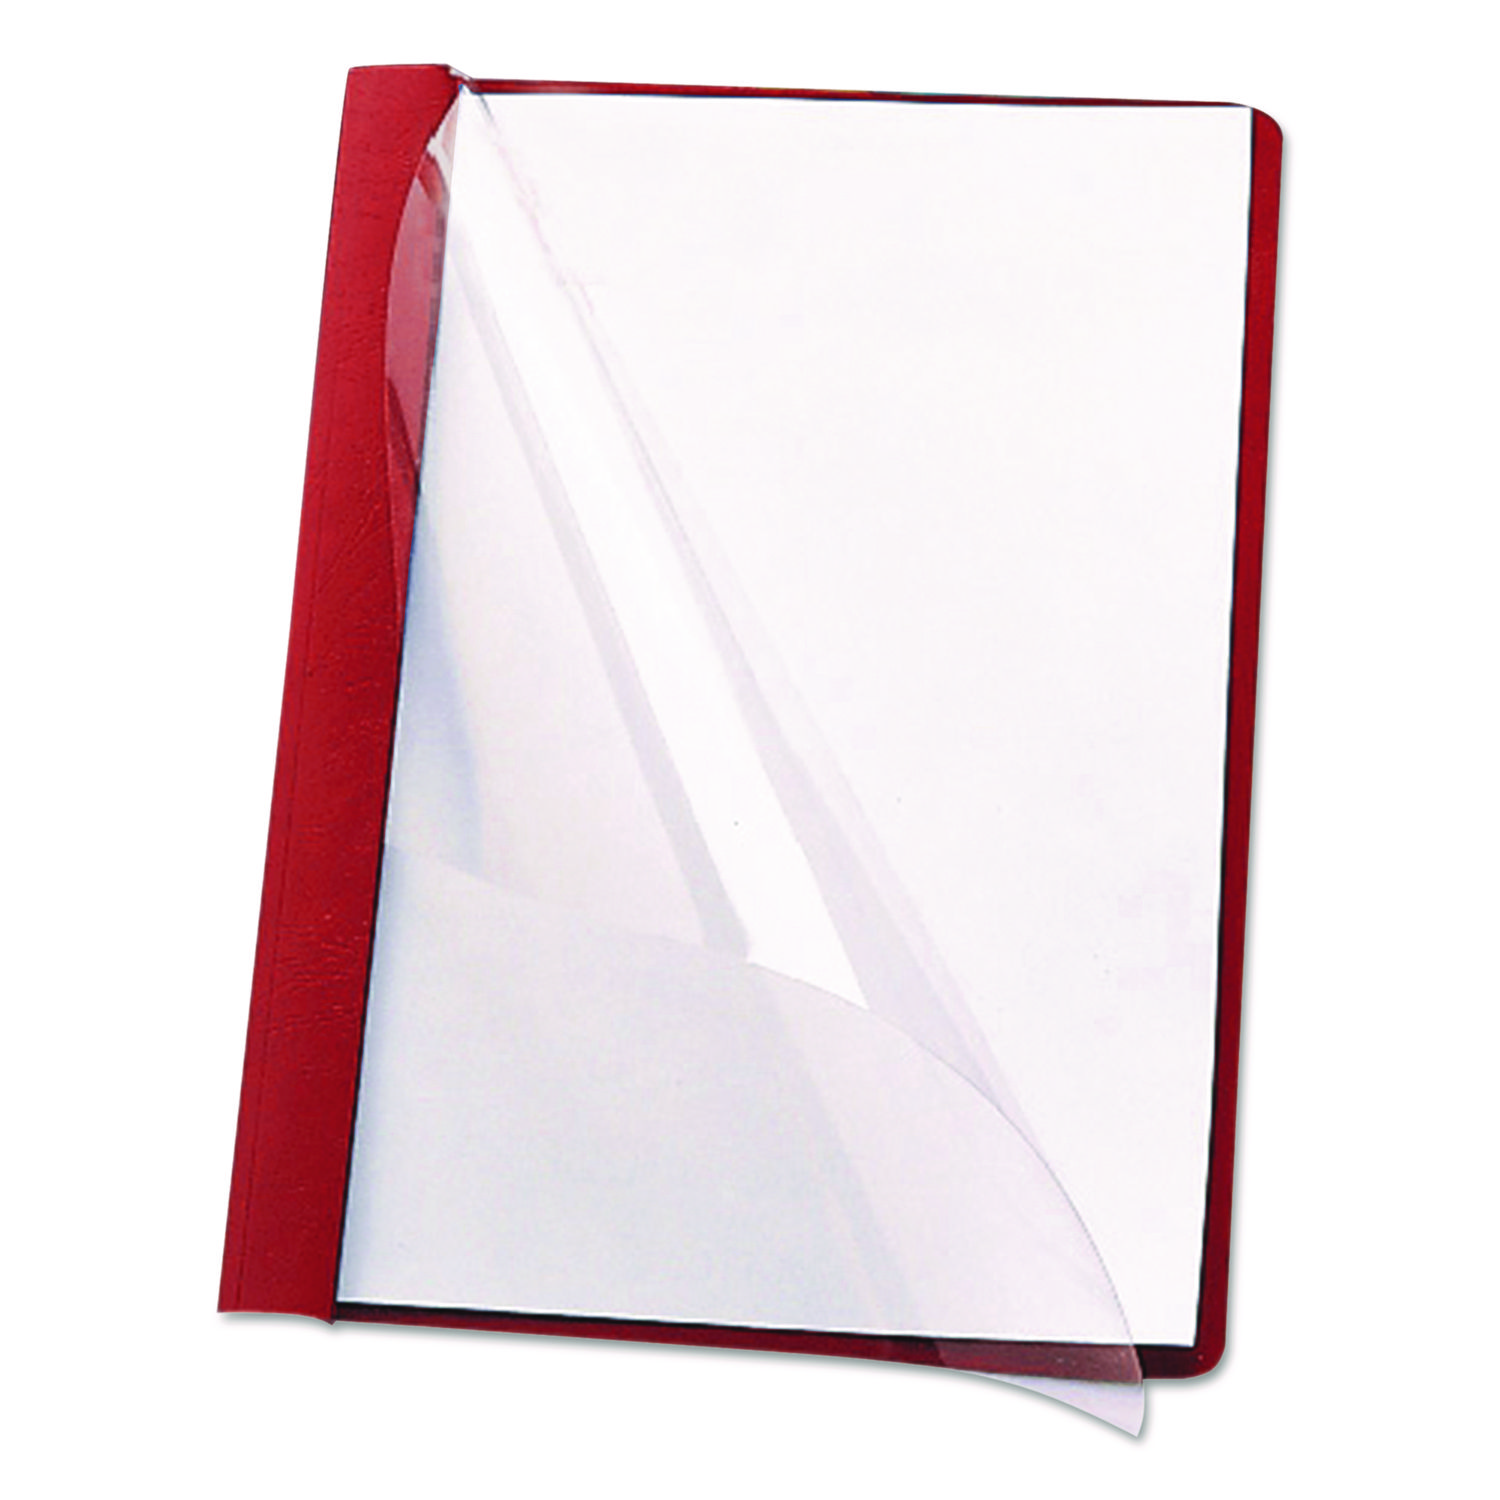 Poly Report Cover, Tang Clip, Letter, 1/2 Capacity, Clear/Red, 25/Box